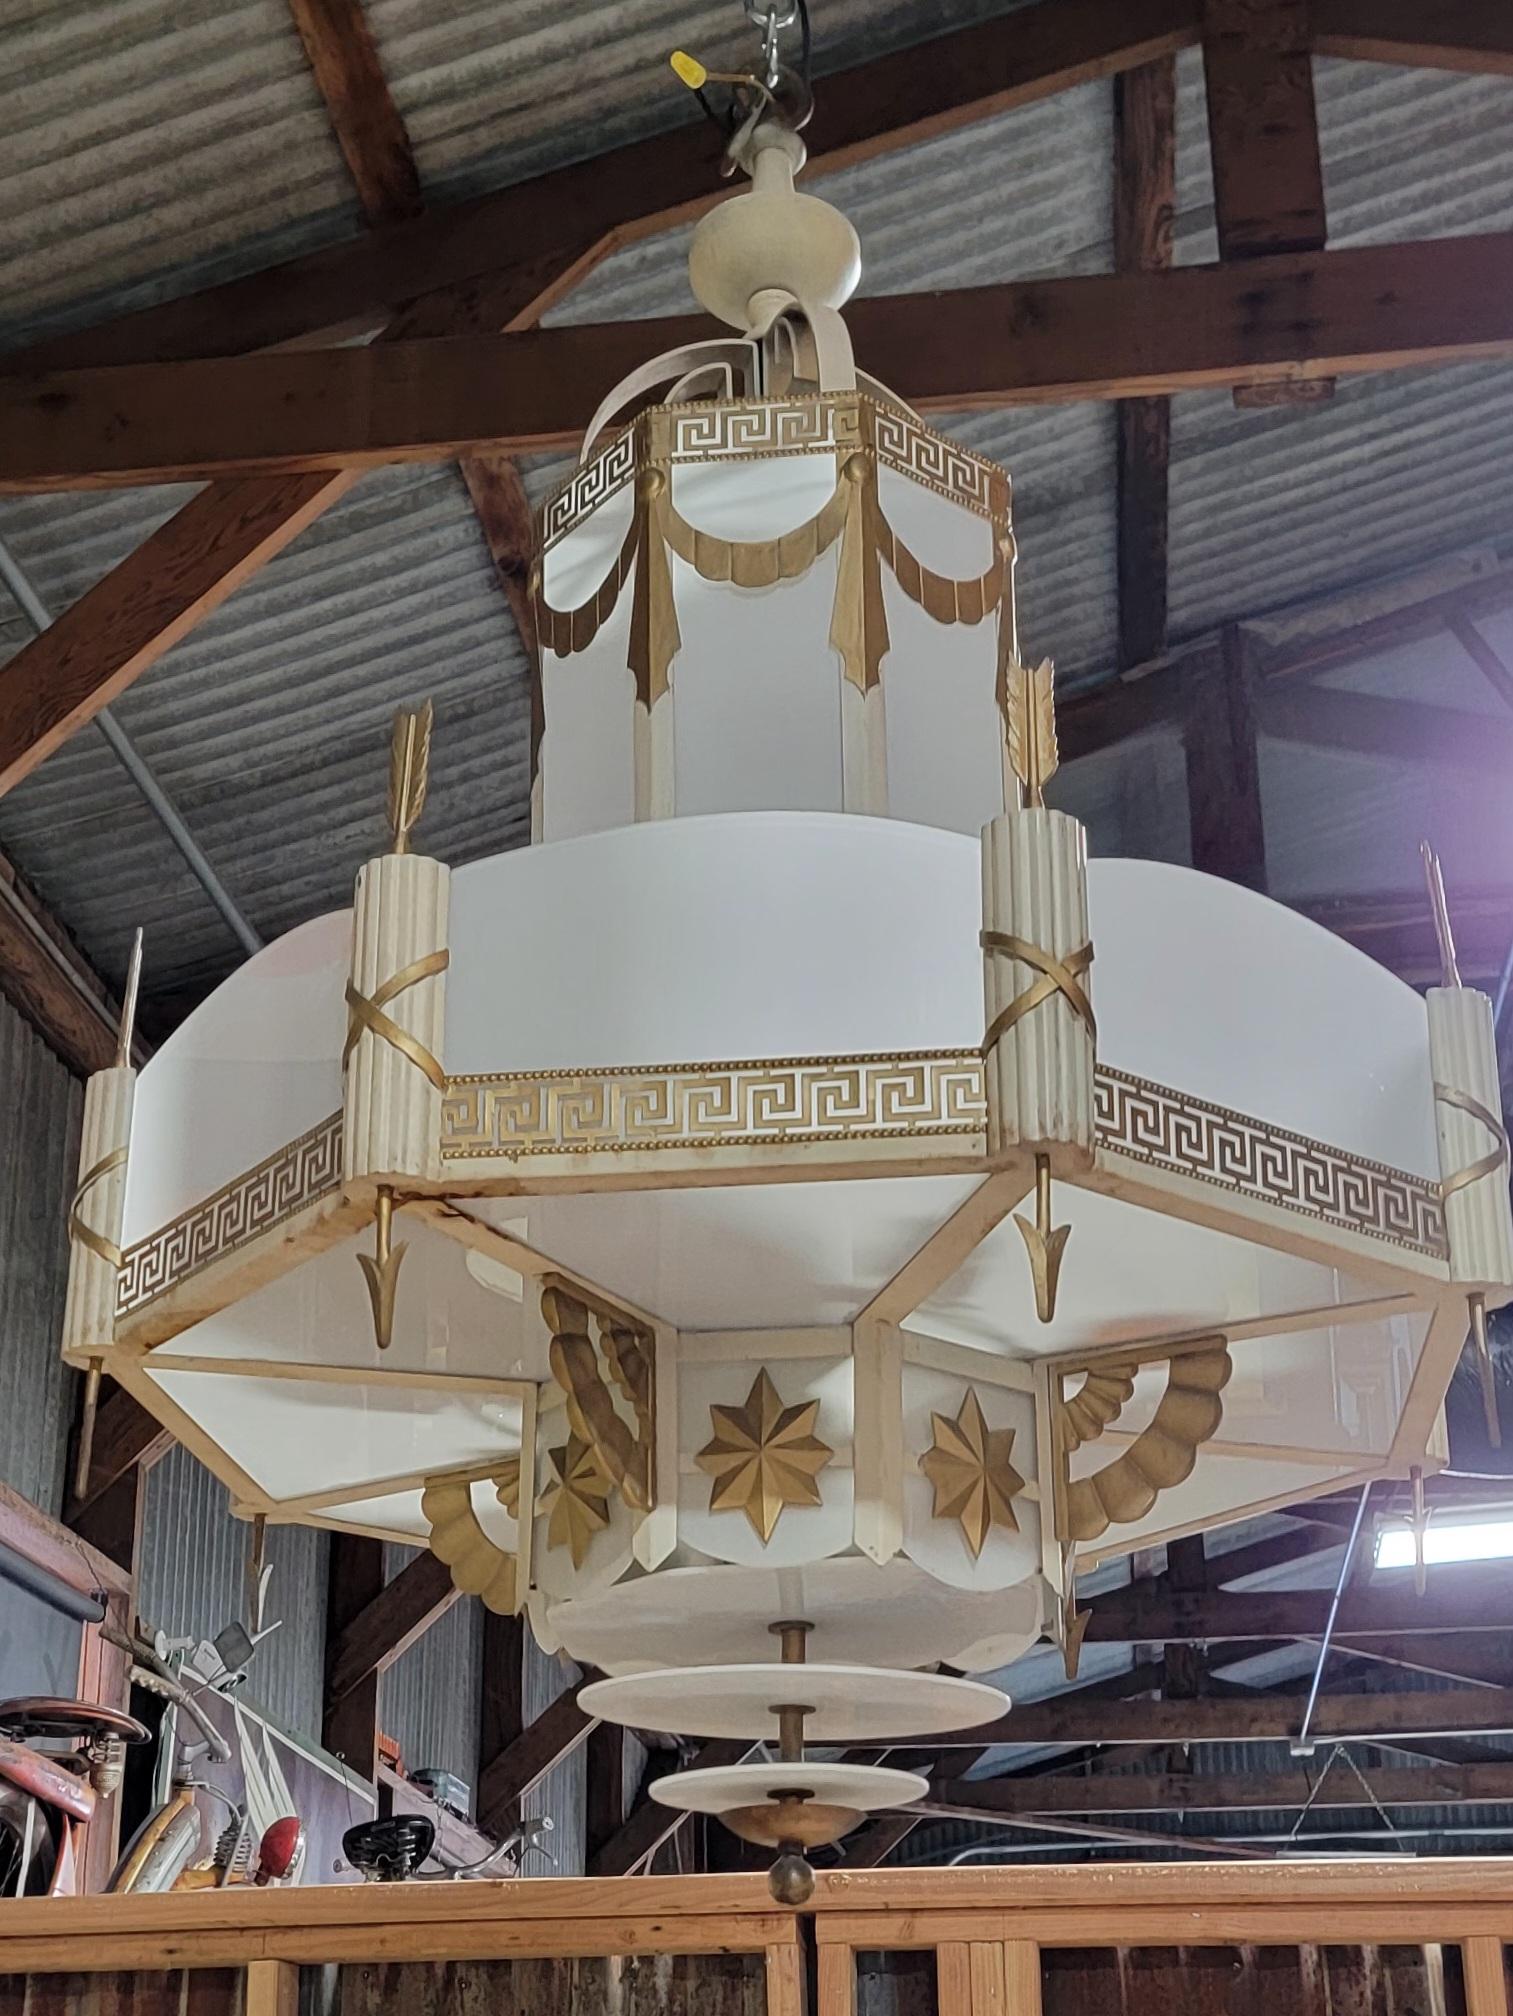 Exceptional and historic Art Deco theater chandeliers Created for the Encore Theater in Burlingame, California, opening in 1930. Original painted surface in off white and gold. Removable milk glass panels. Color of chandelier can be changed to